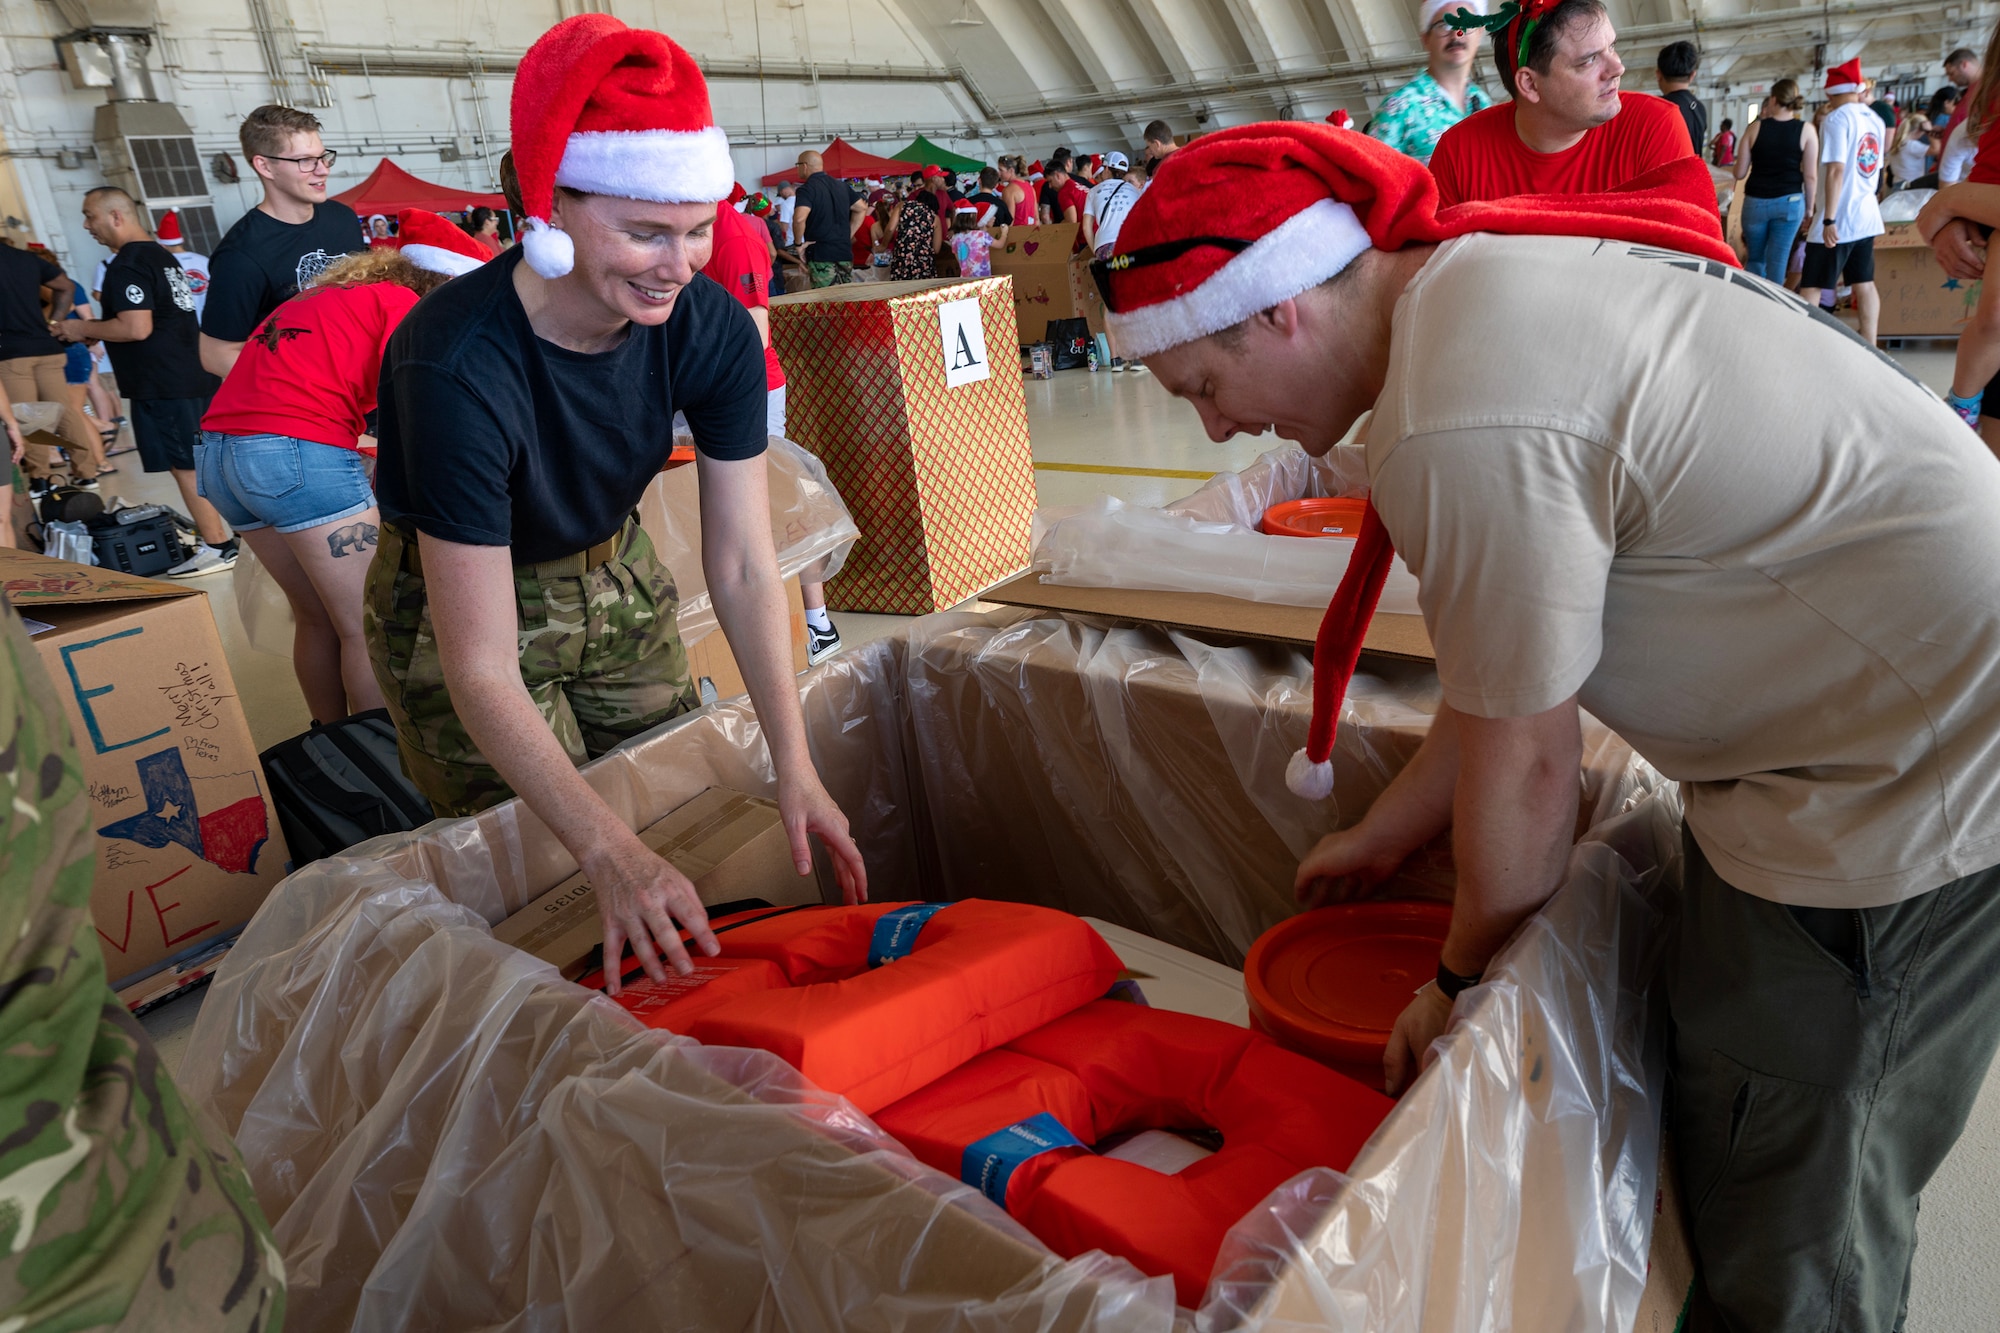 Operation Christmas Drop members add items to a box during Operation Christmas Drop